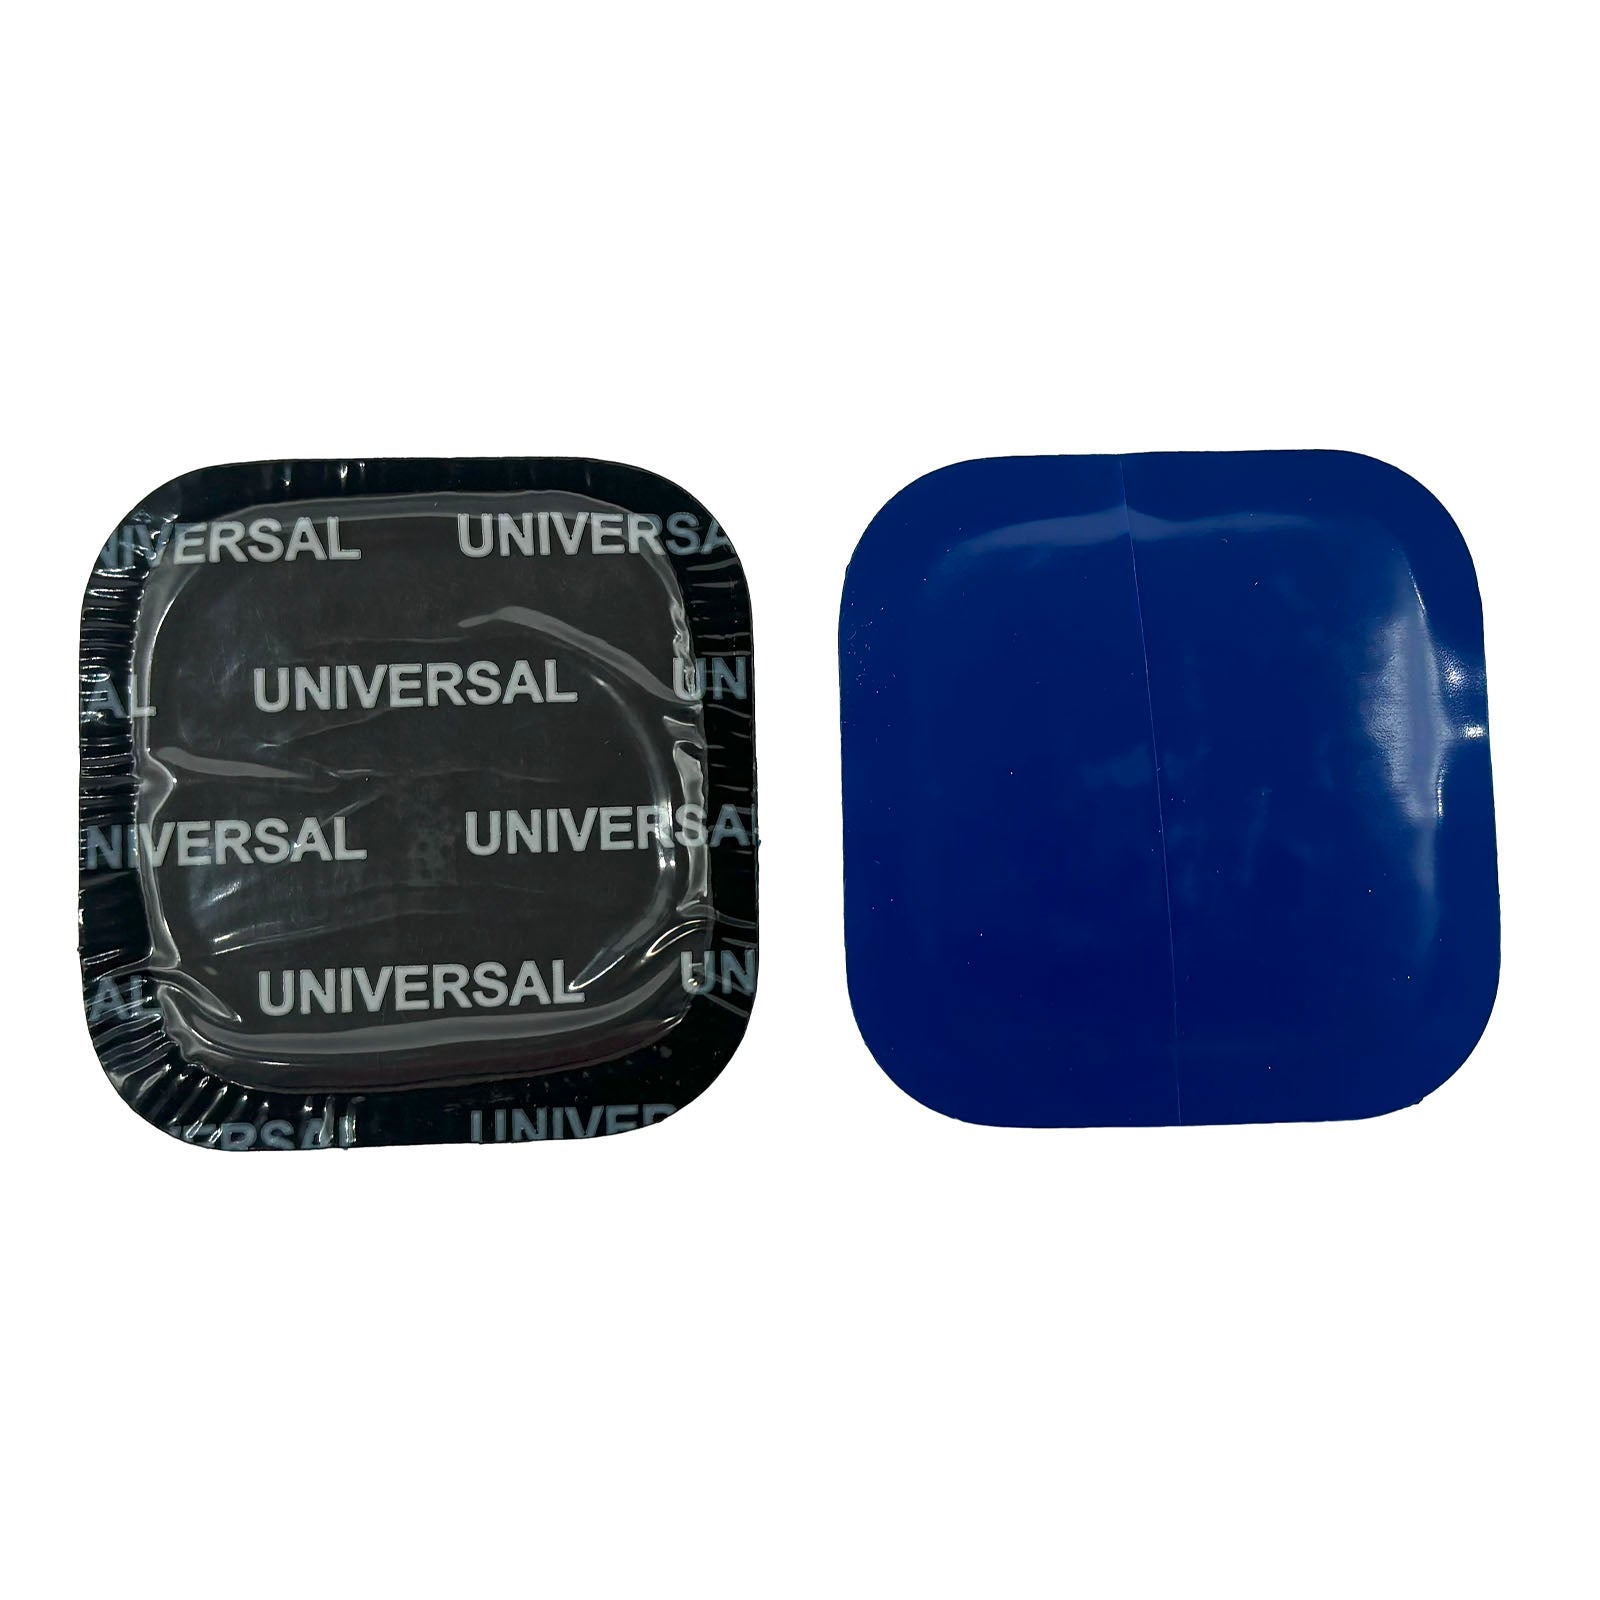 Kex UP-55 Universal Patch, 2-1/8" Square (30 bx)